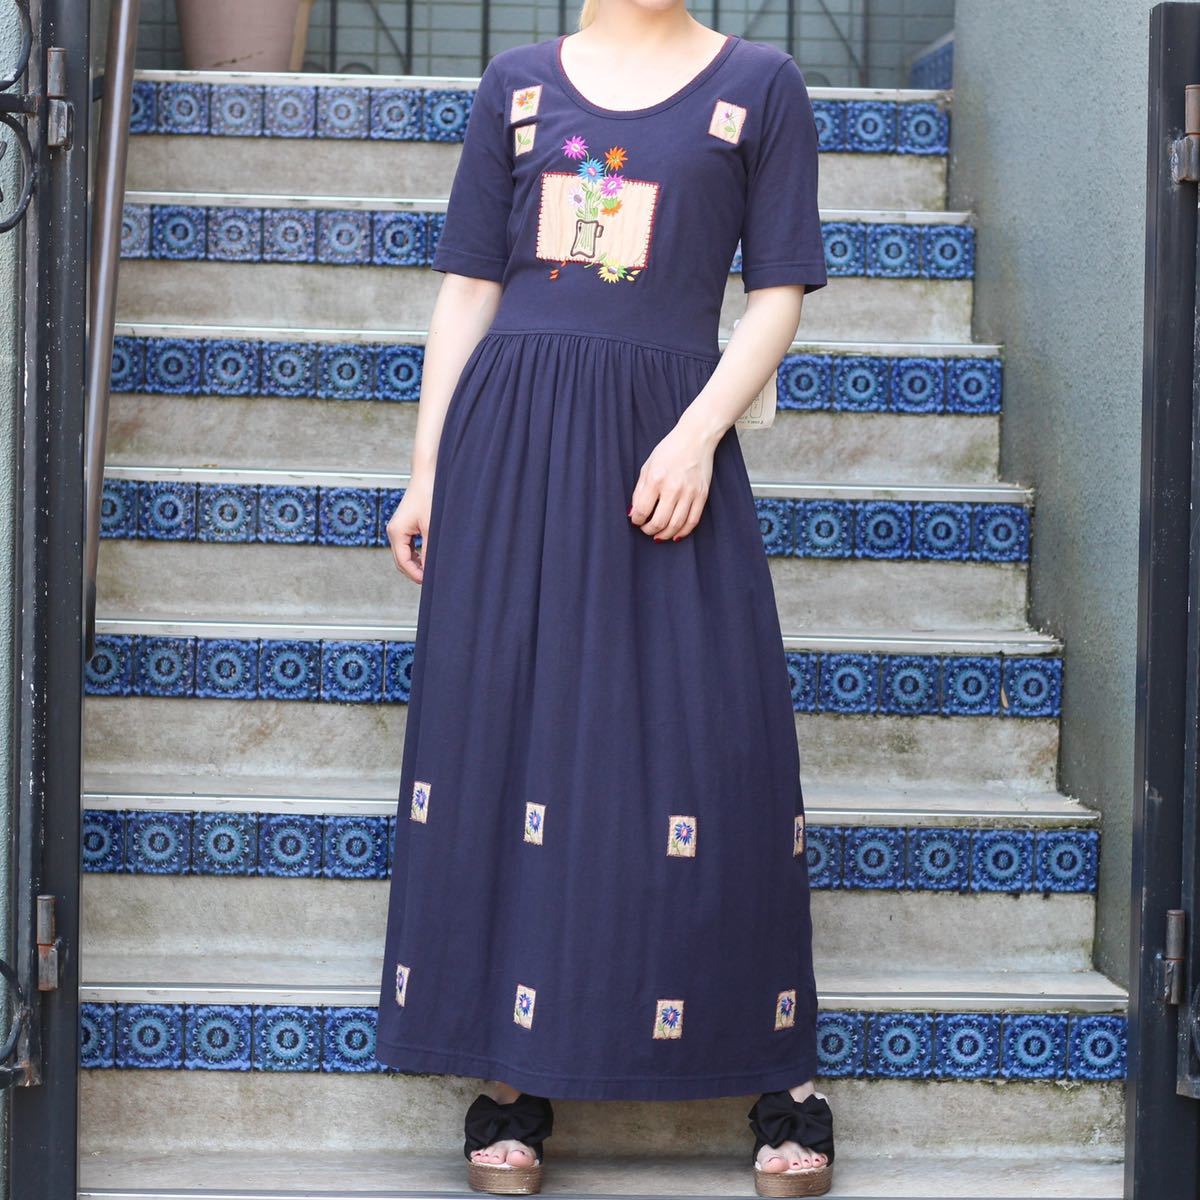 USA VINTAGE karin steavens HALF SLEEVE EMBROIDERY DESIGN ONE PIECE/アメリカ古着半袖刺繍デザインワンピース